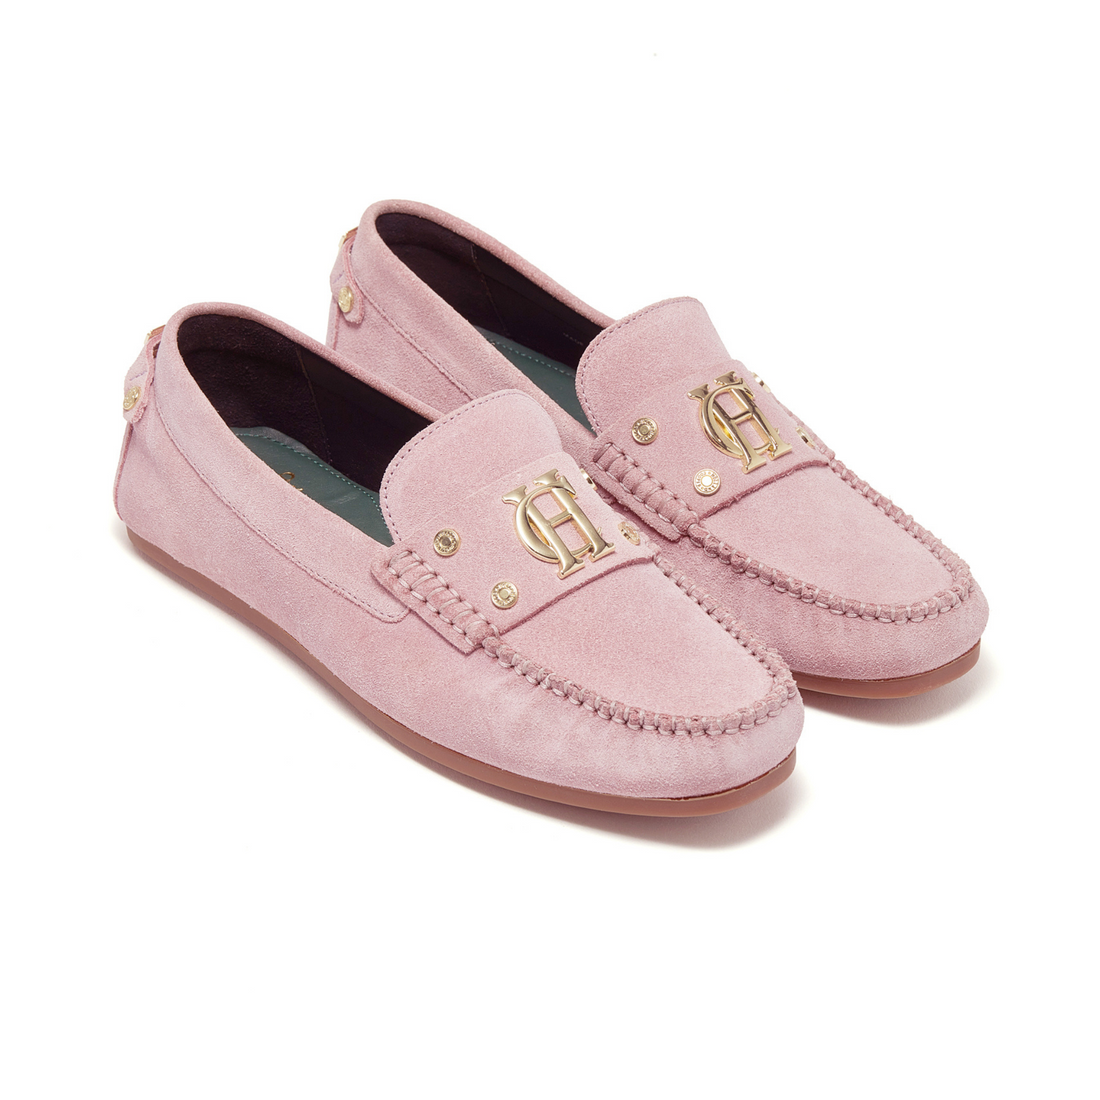 The Driving Loafer Soft Pink Suede